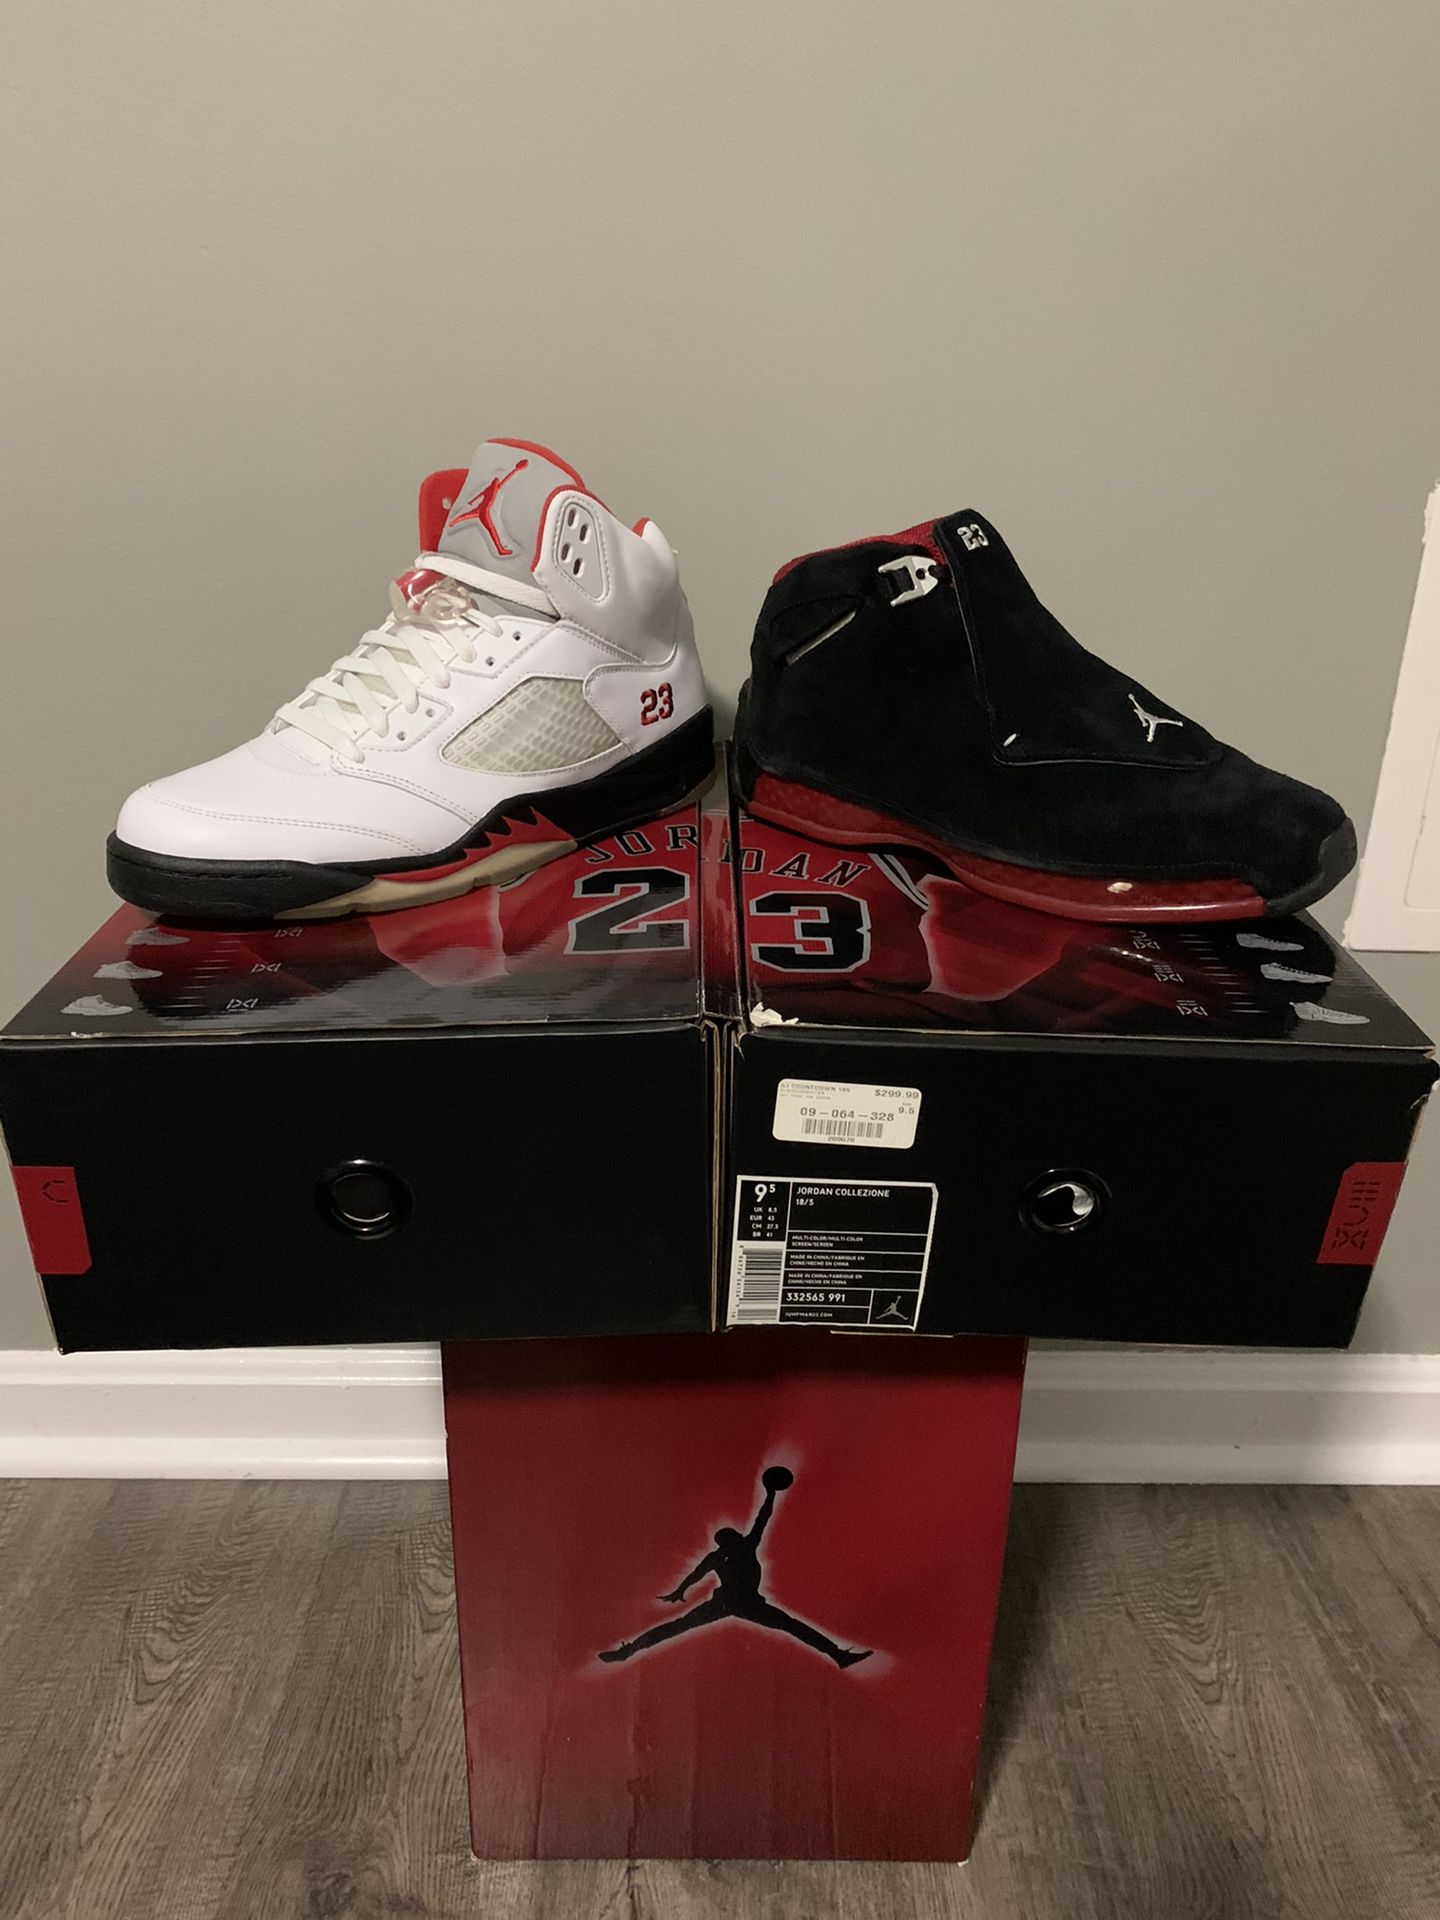 18’s from the Jordan 5/18 package